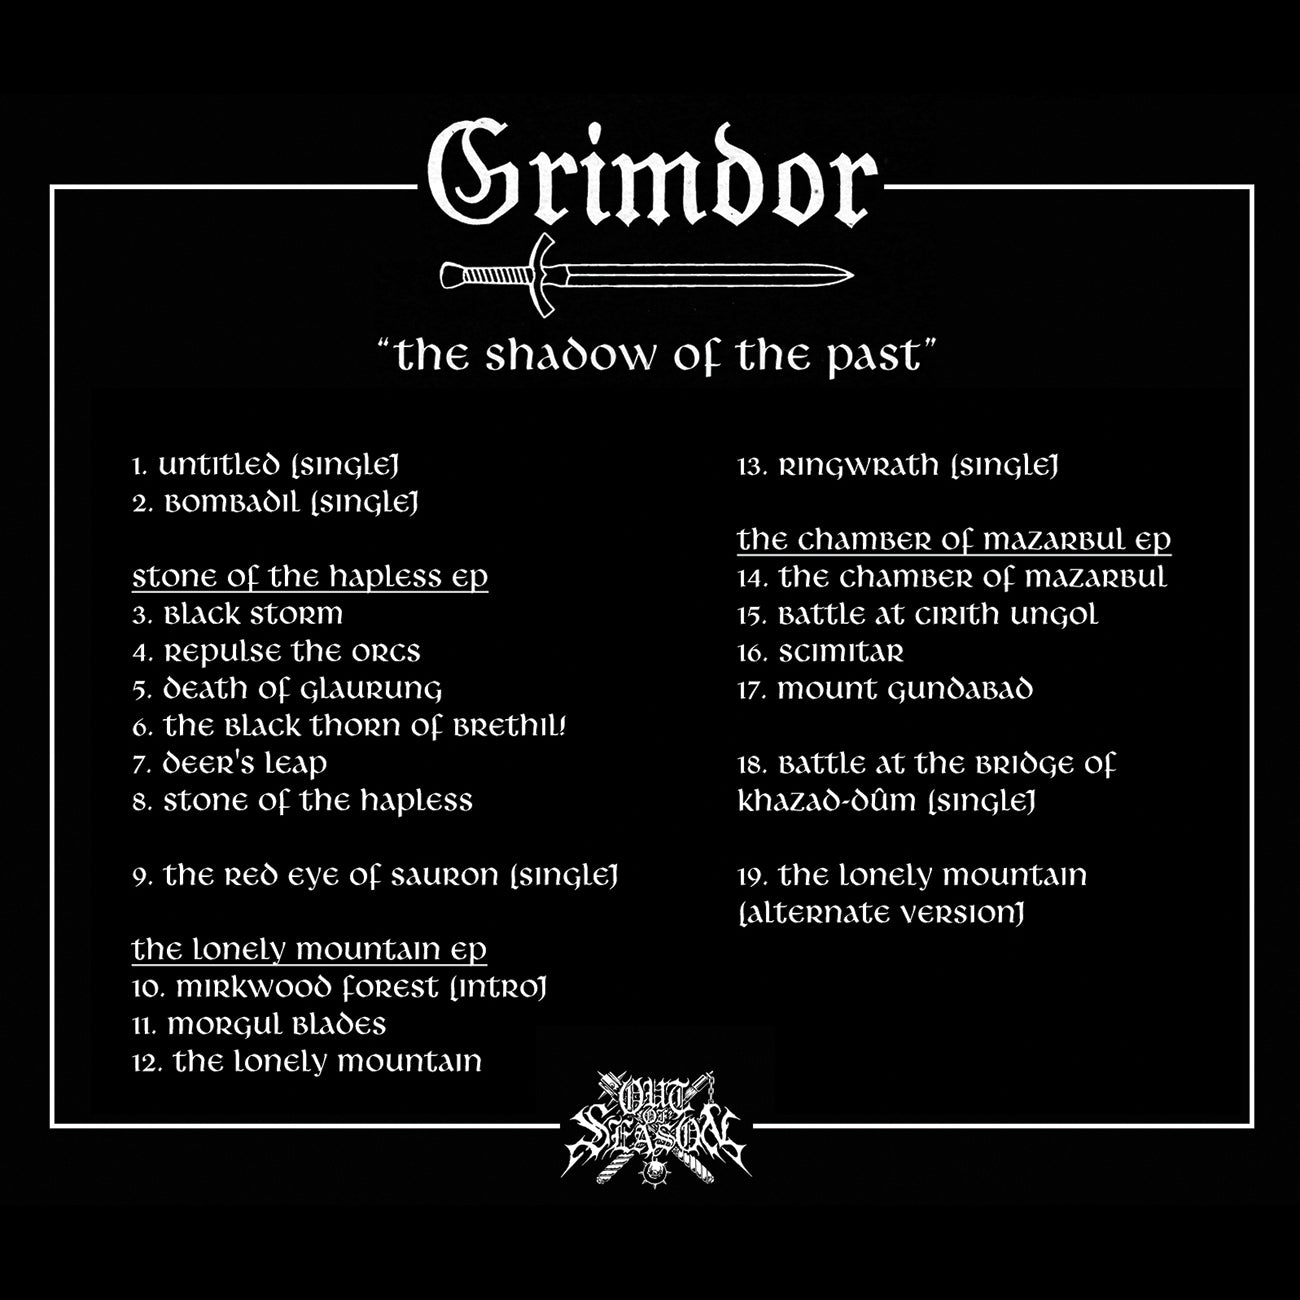 [SOLD OUT] GRIMDOR "The Shadow of the Past" CD